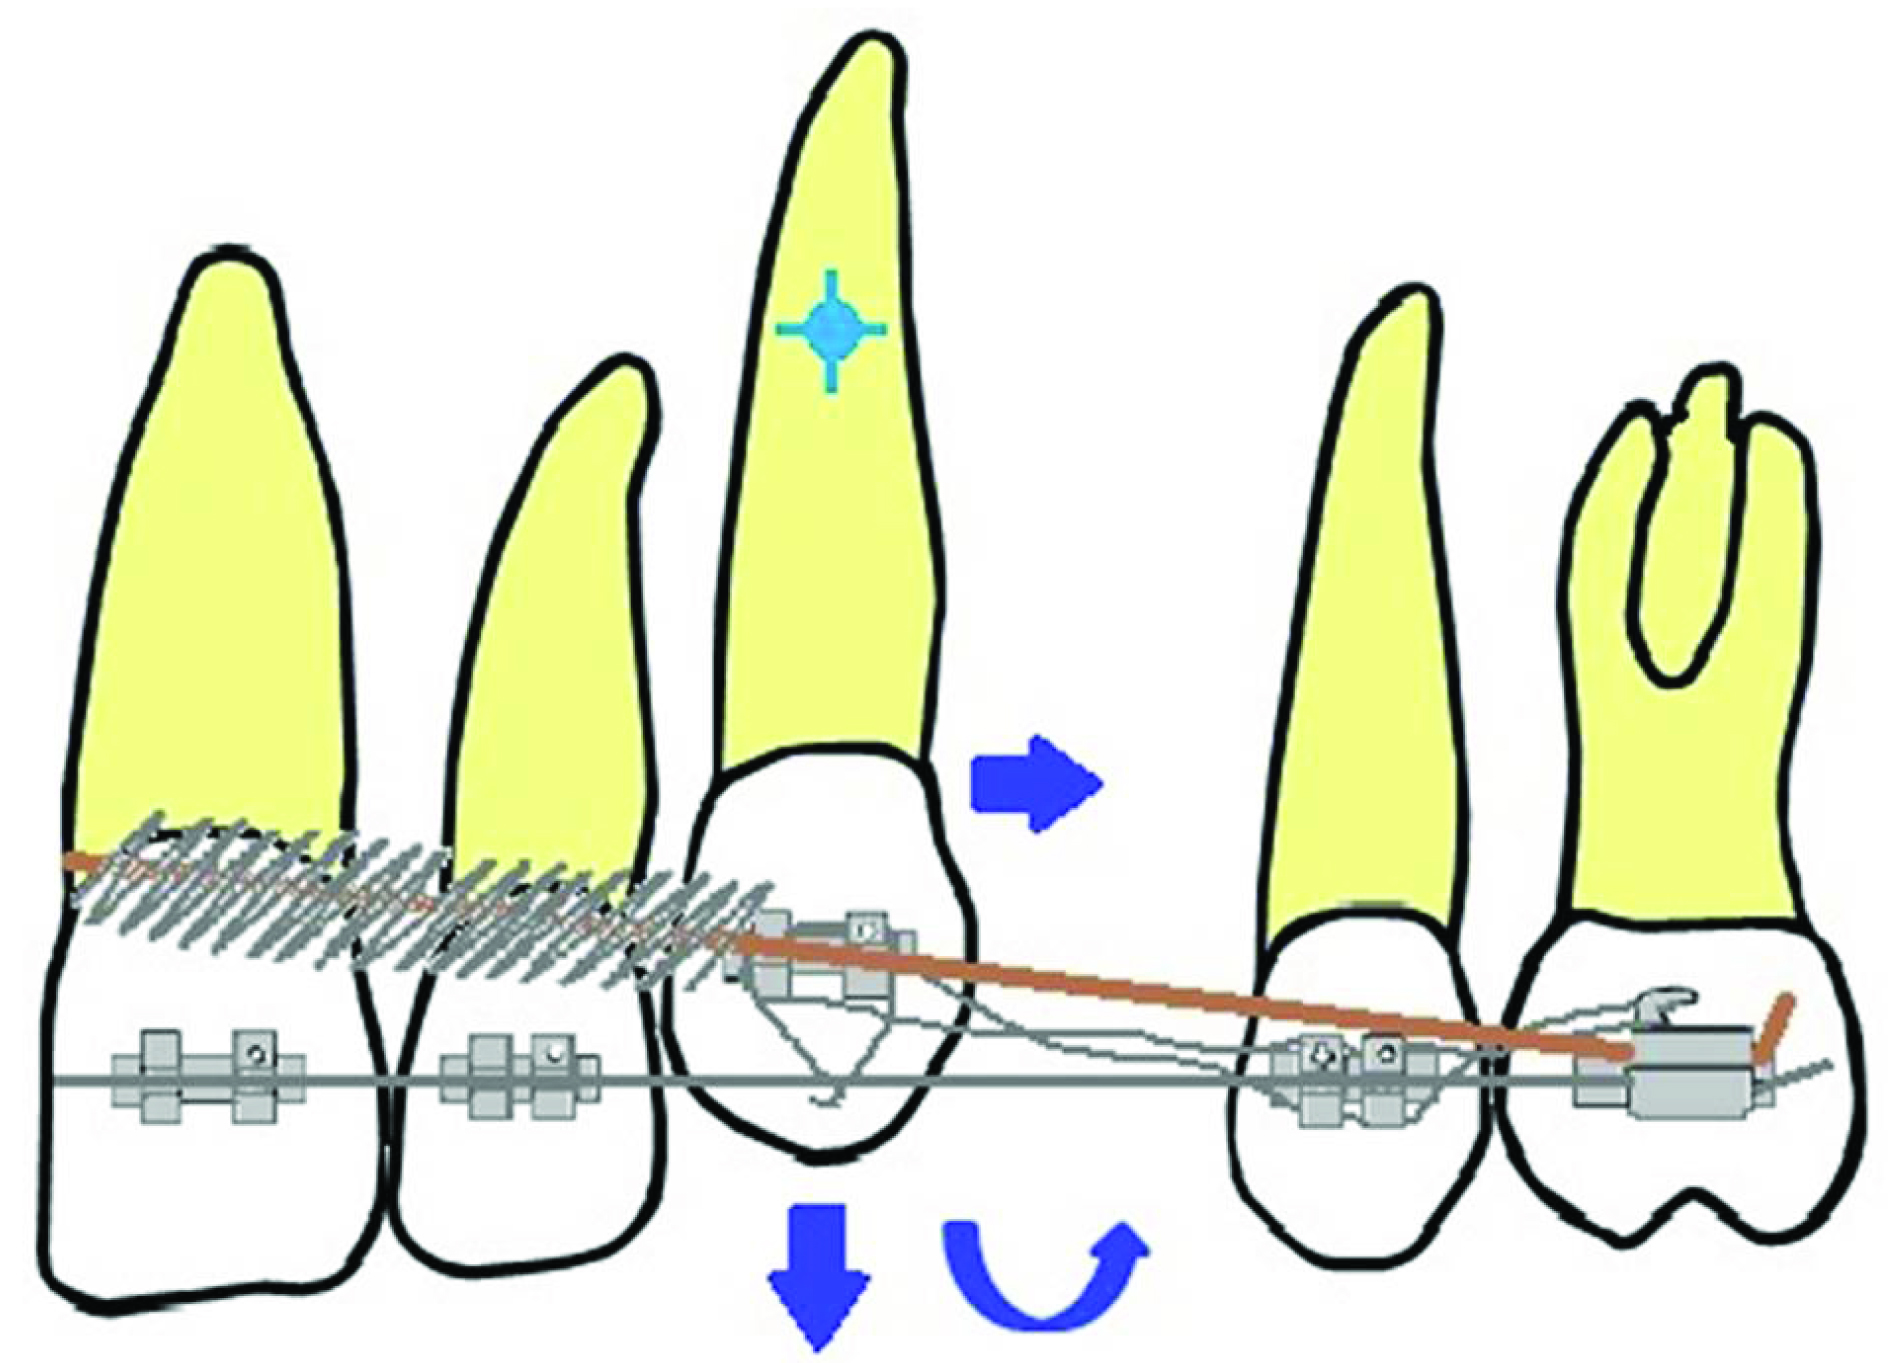 JCDR - Alignment, Canine lacebacks, Incisor crowding, Open coil springs,  Sliding mechanics